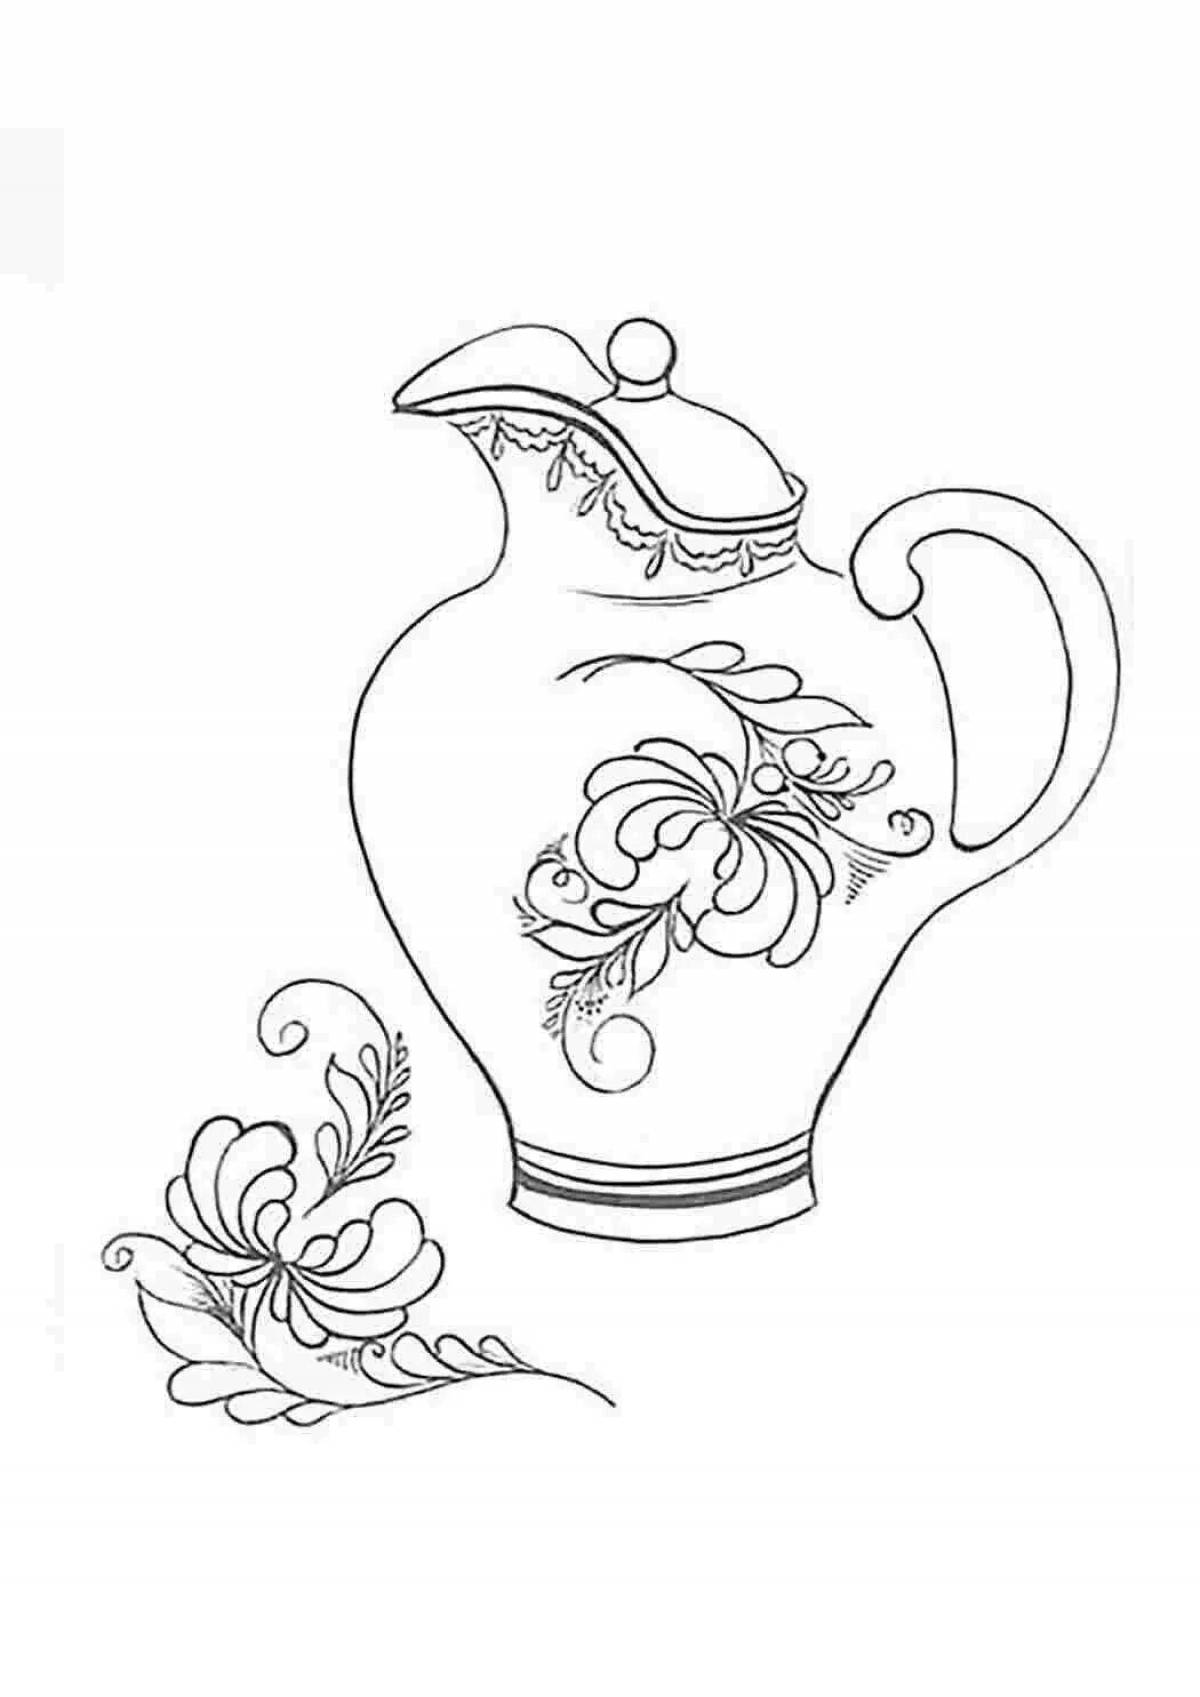 Gzhel coloring pages